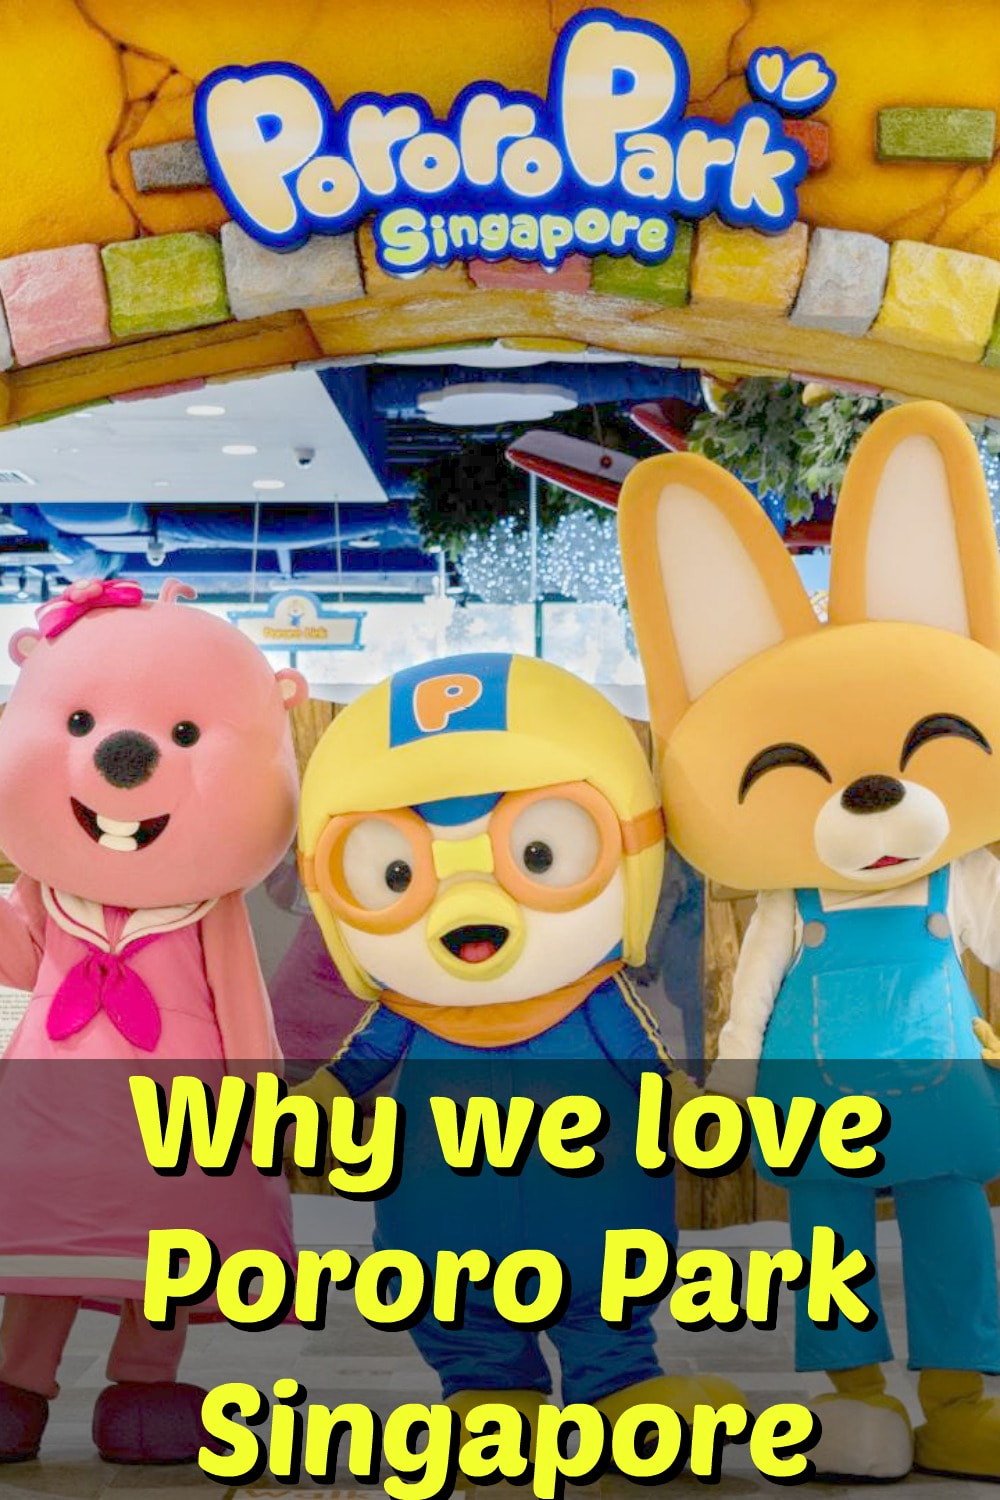 Pinterest Pinnable Image. Calling all parents: Share this with your friends and family who have little fans of the Pororo animated series at home! I'm sure they will enjoy a day visit to Pororo Park Singapore at Marina Square! 